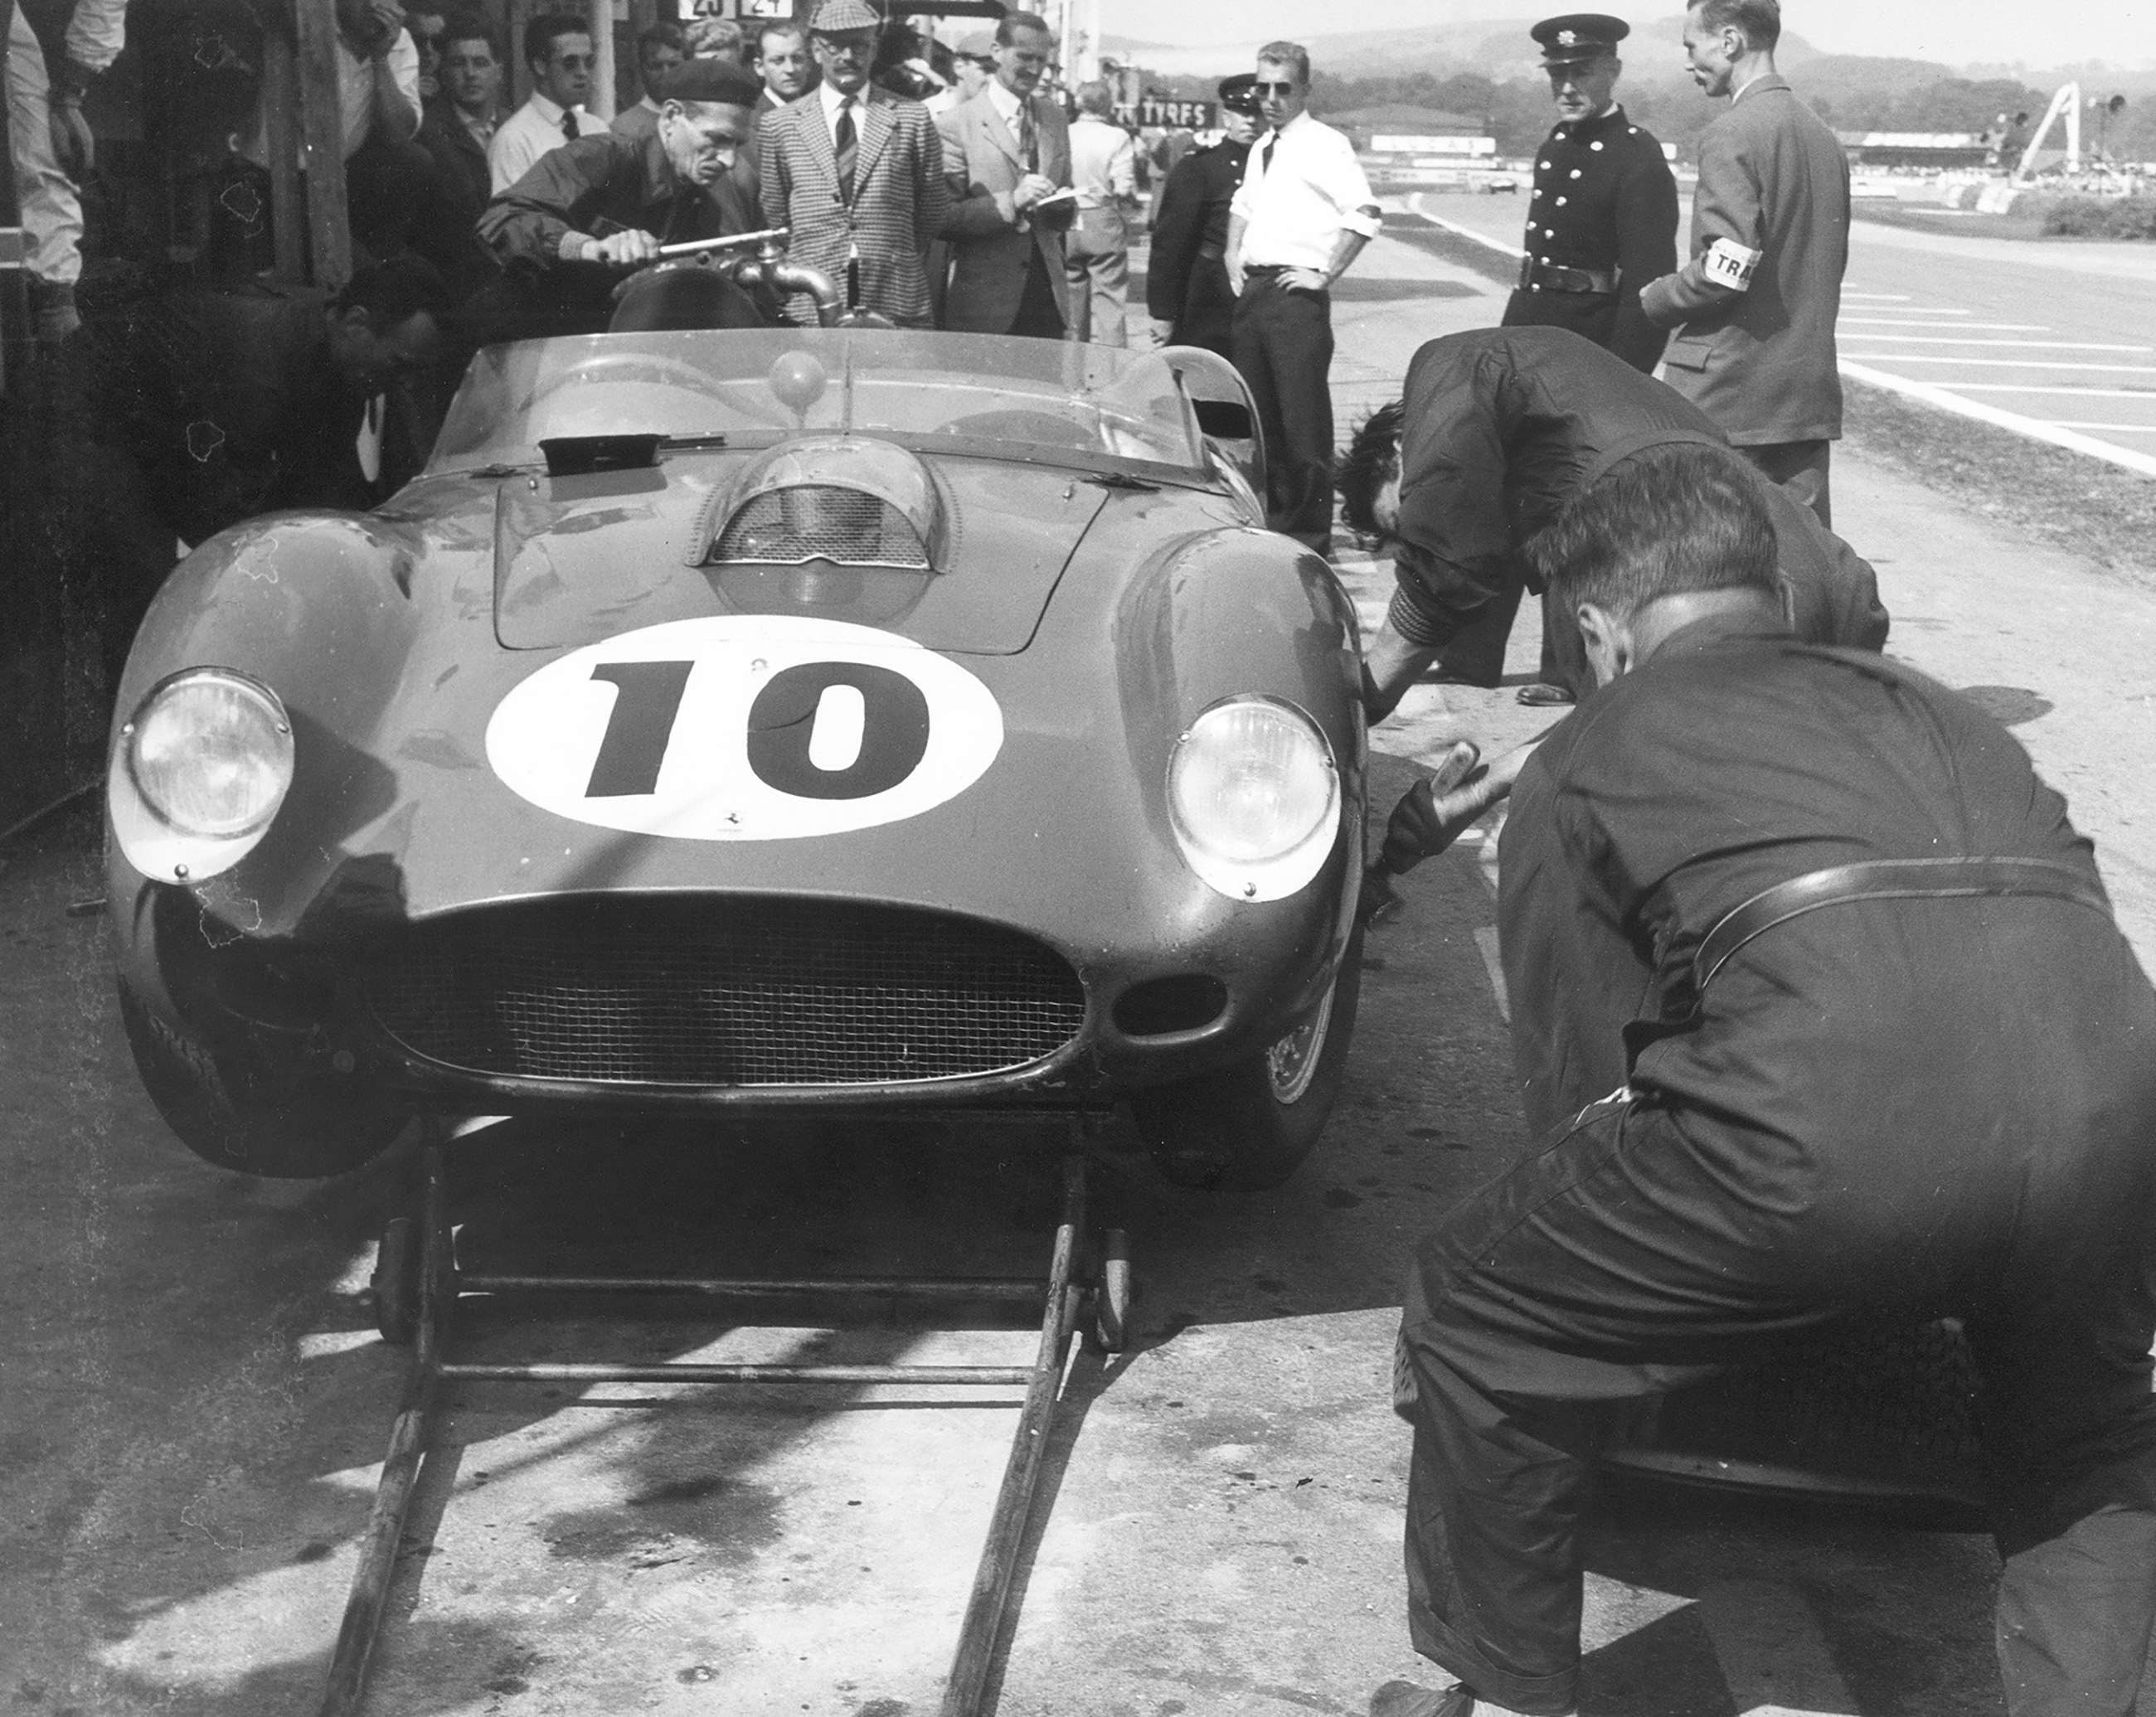 Just for once it wasn’t Ferrari who had “a Chinese fire-drill” pit-stop - this is Tony Brooks’s works Testa Rossa being fuelled just fine – see the big stop-cock handle on the filler hose… John Bolster in deer stalker, background, and the narrow grass divider strip on which Roy Salvadori landed to the right...